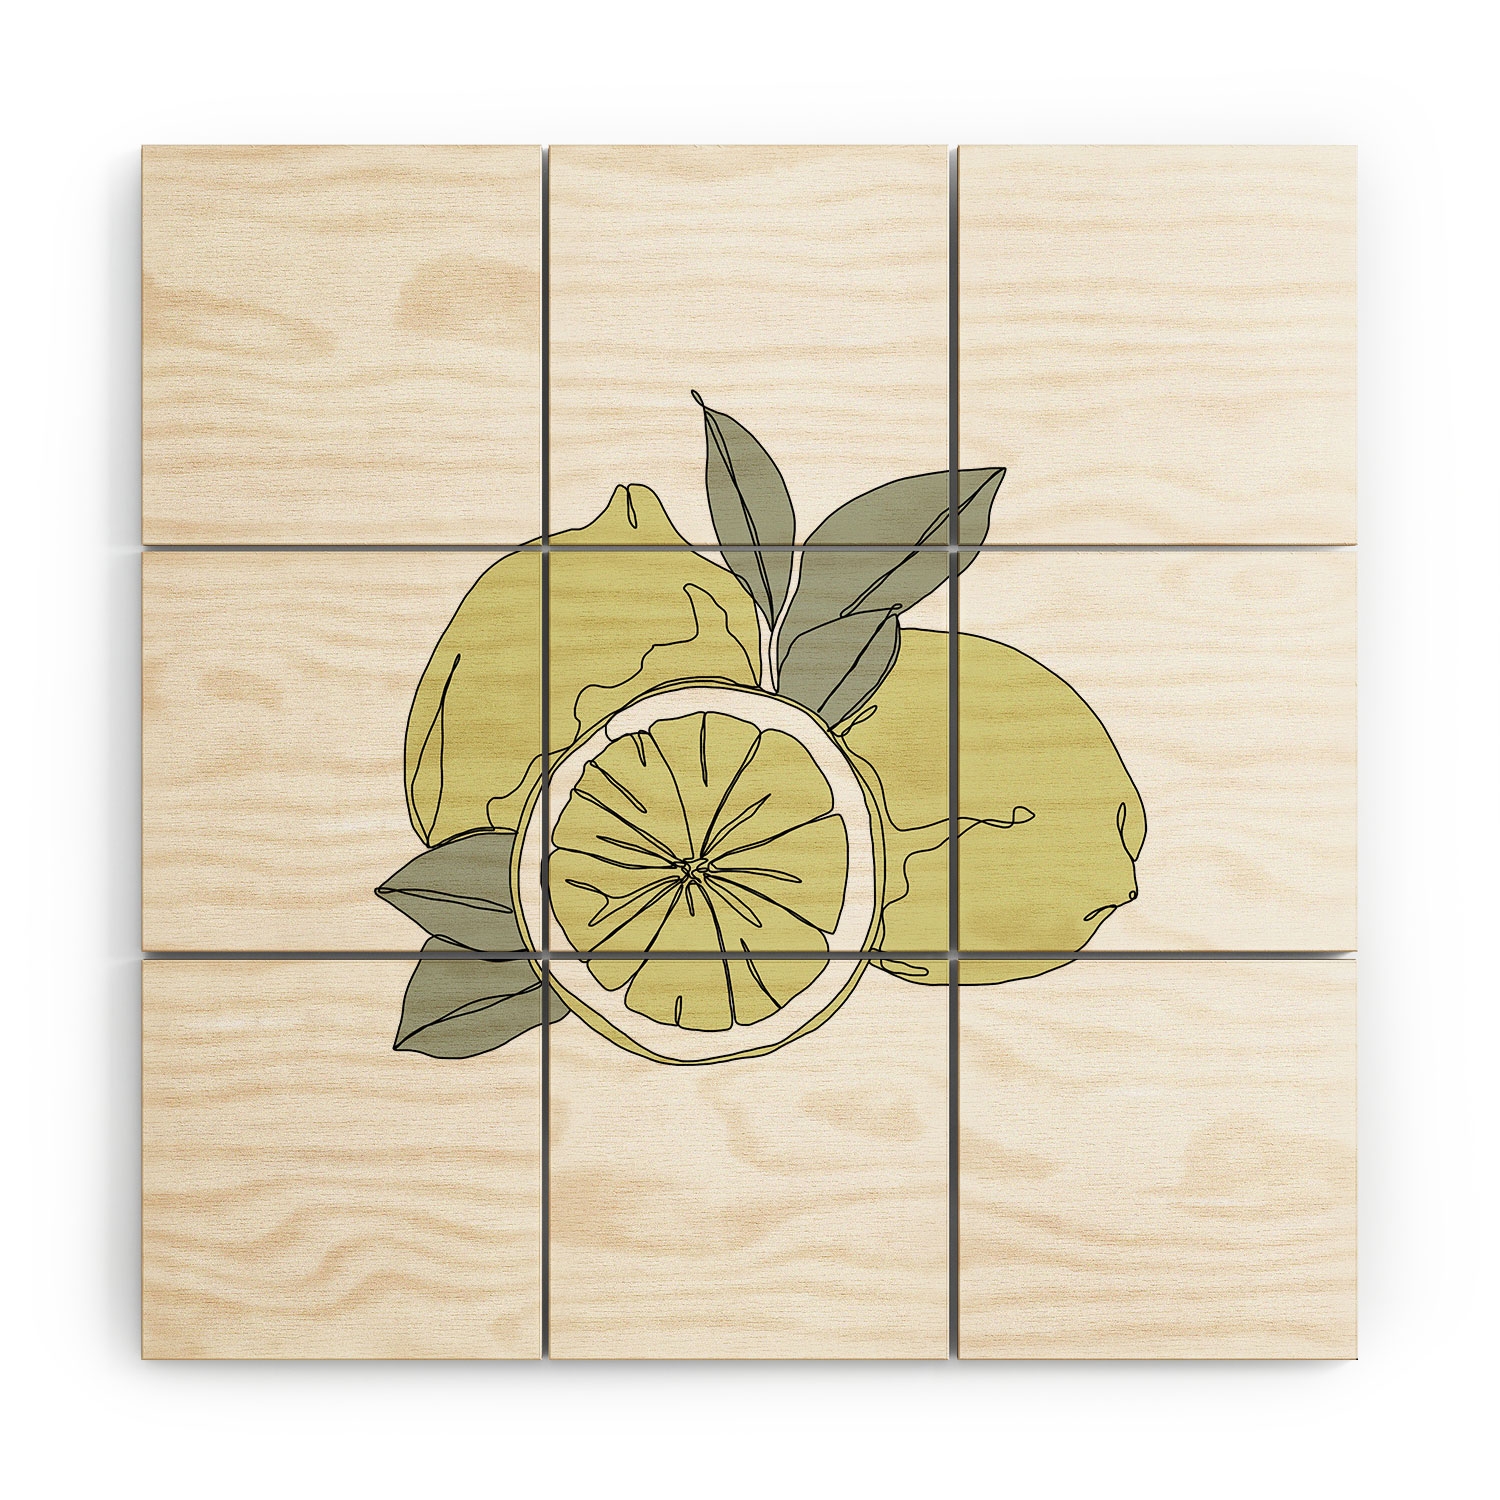 Lemons Artwork by The Colour Study - Wood Wall Mural3' X 3' (Nine 12" Wood Squares) - Image 0